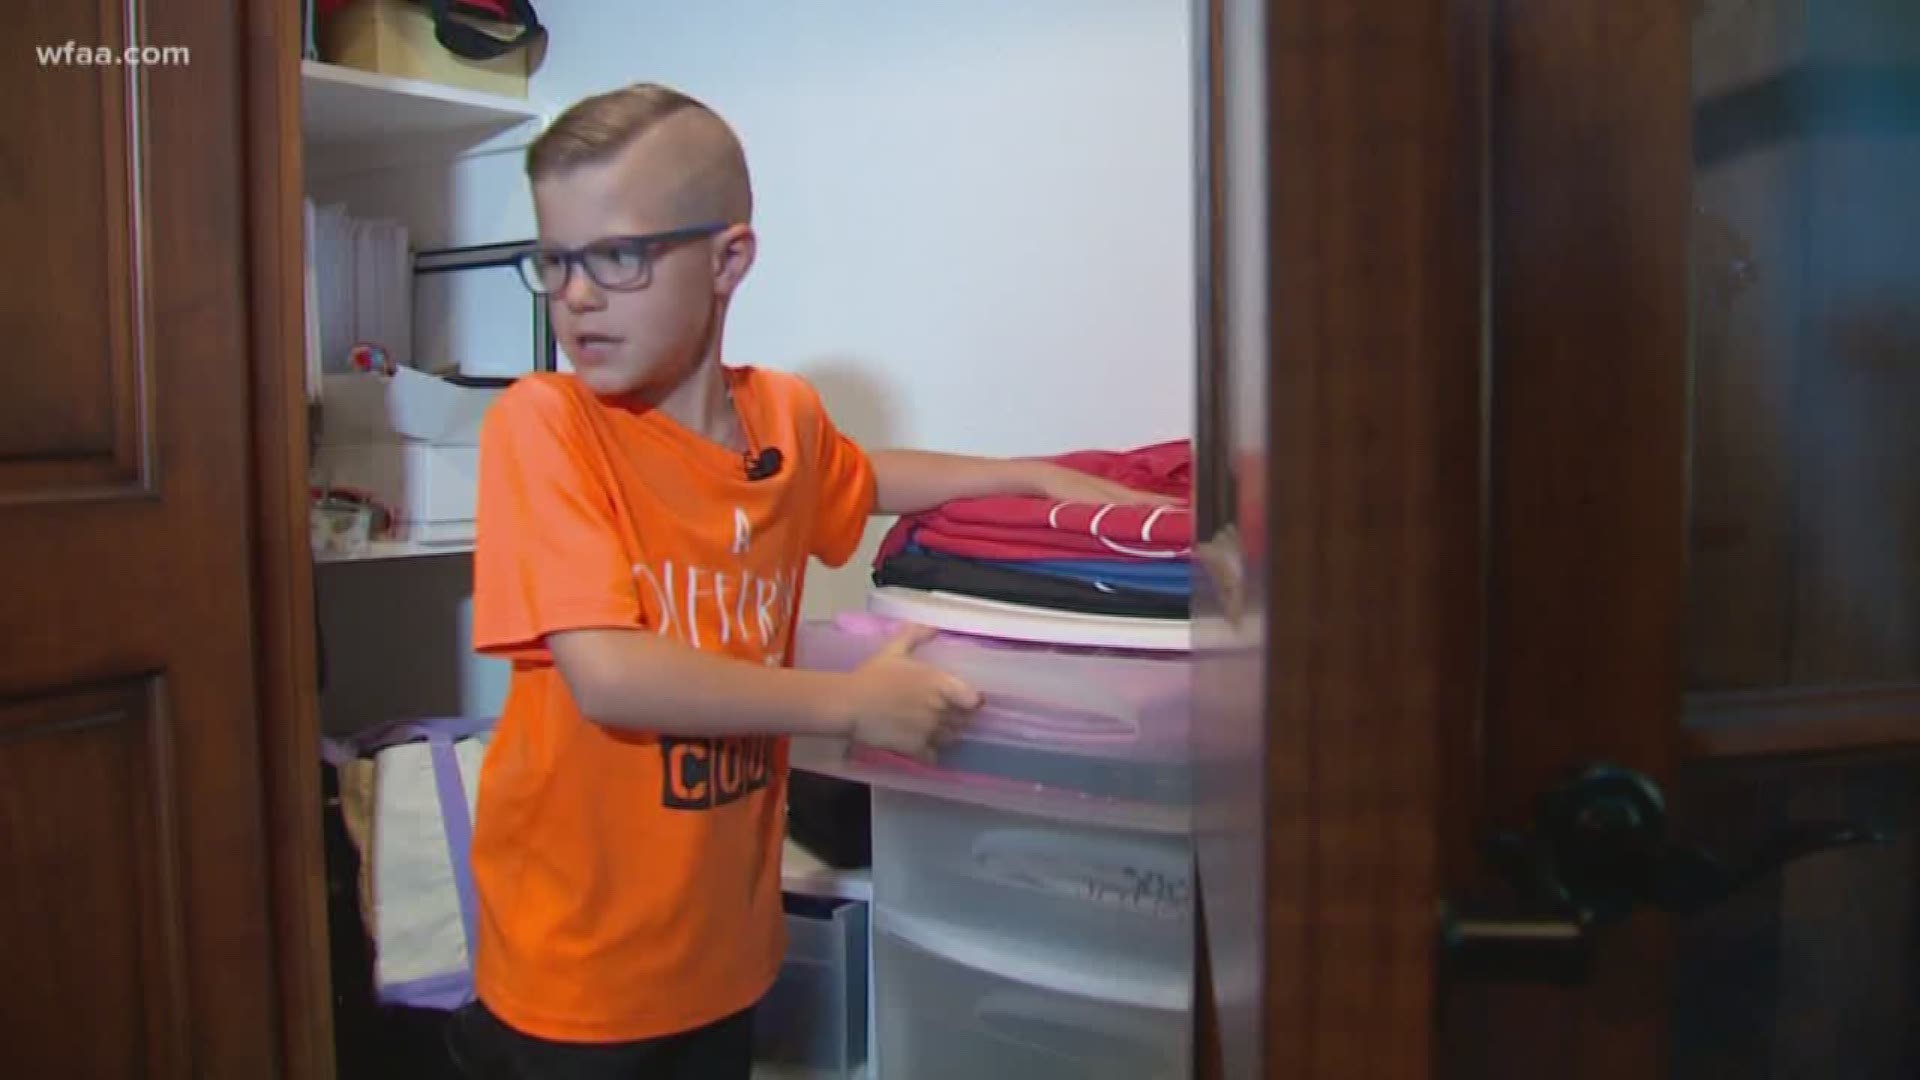 Bullied boy starts his own business